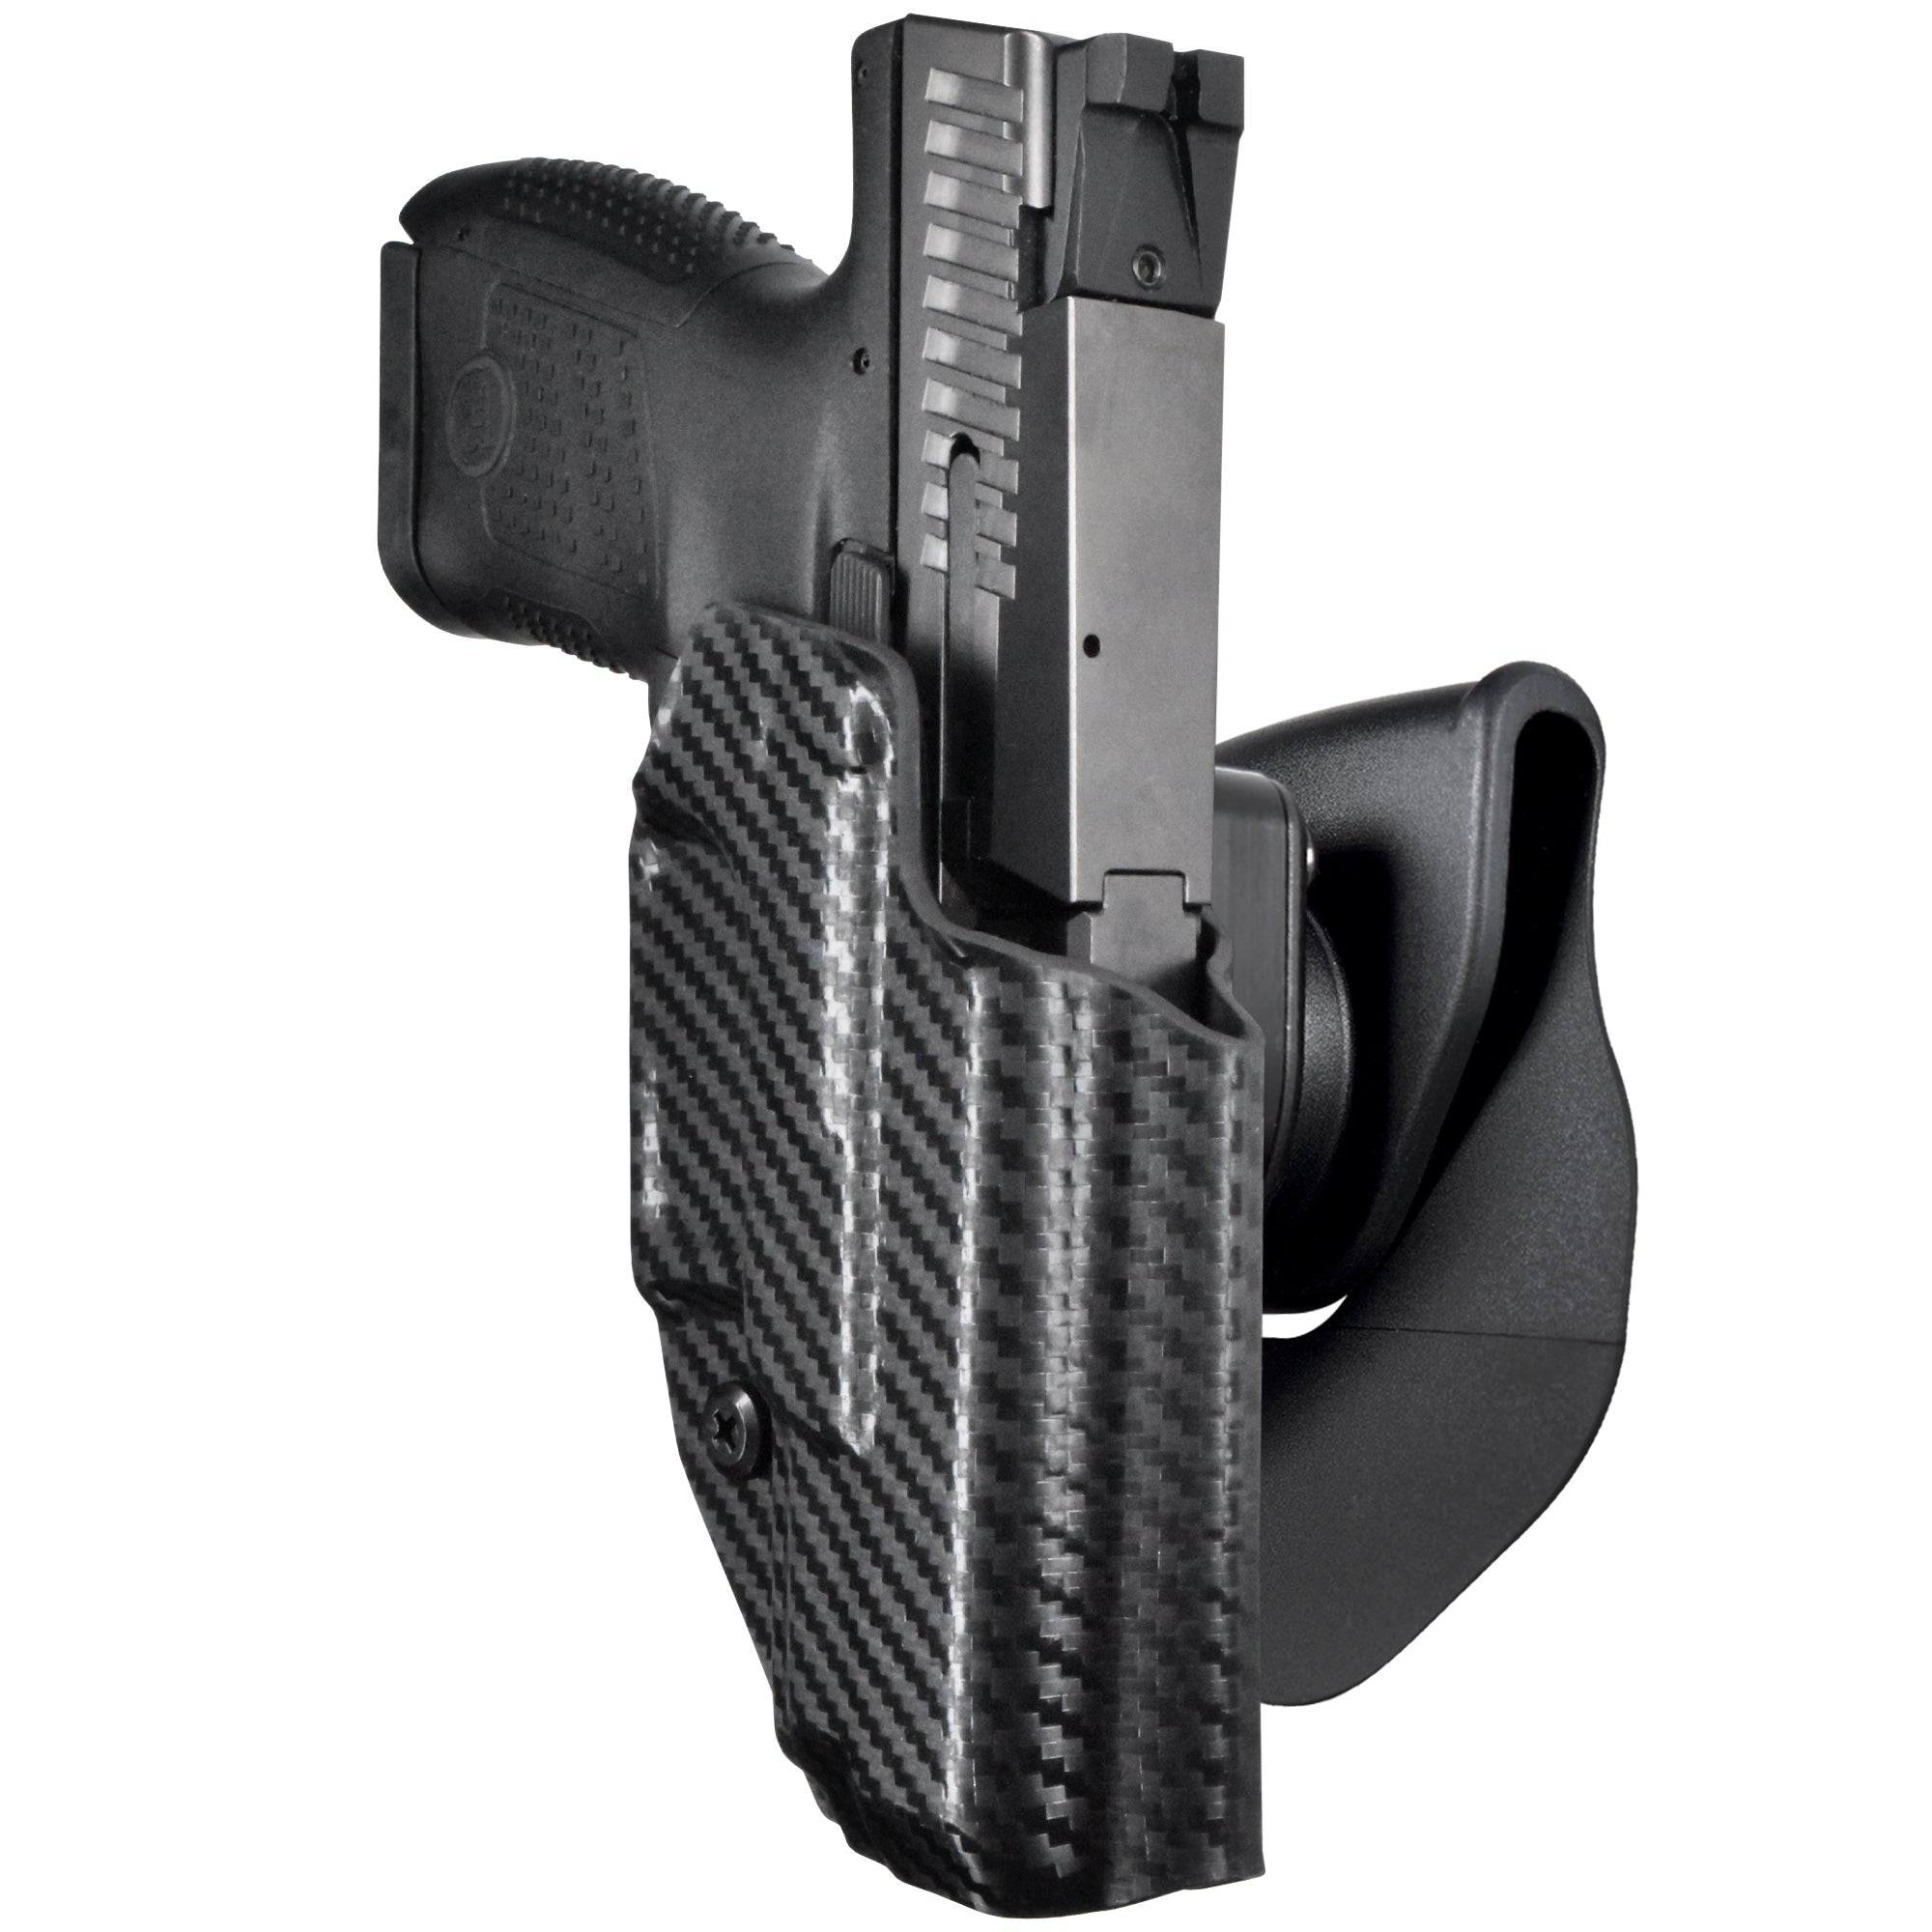 CZ P-10 S Quick Release Paddle Holster